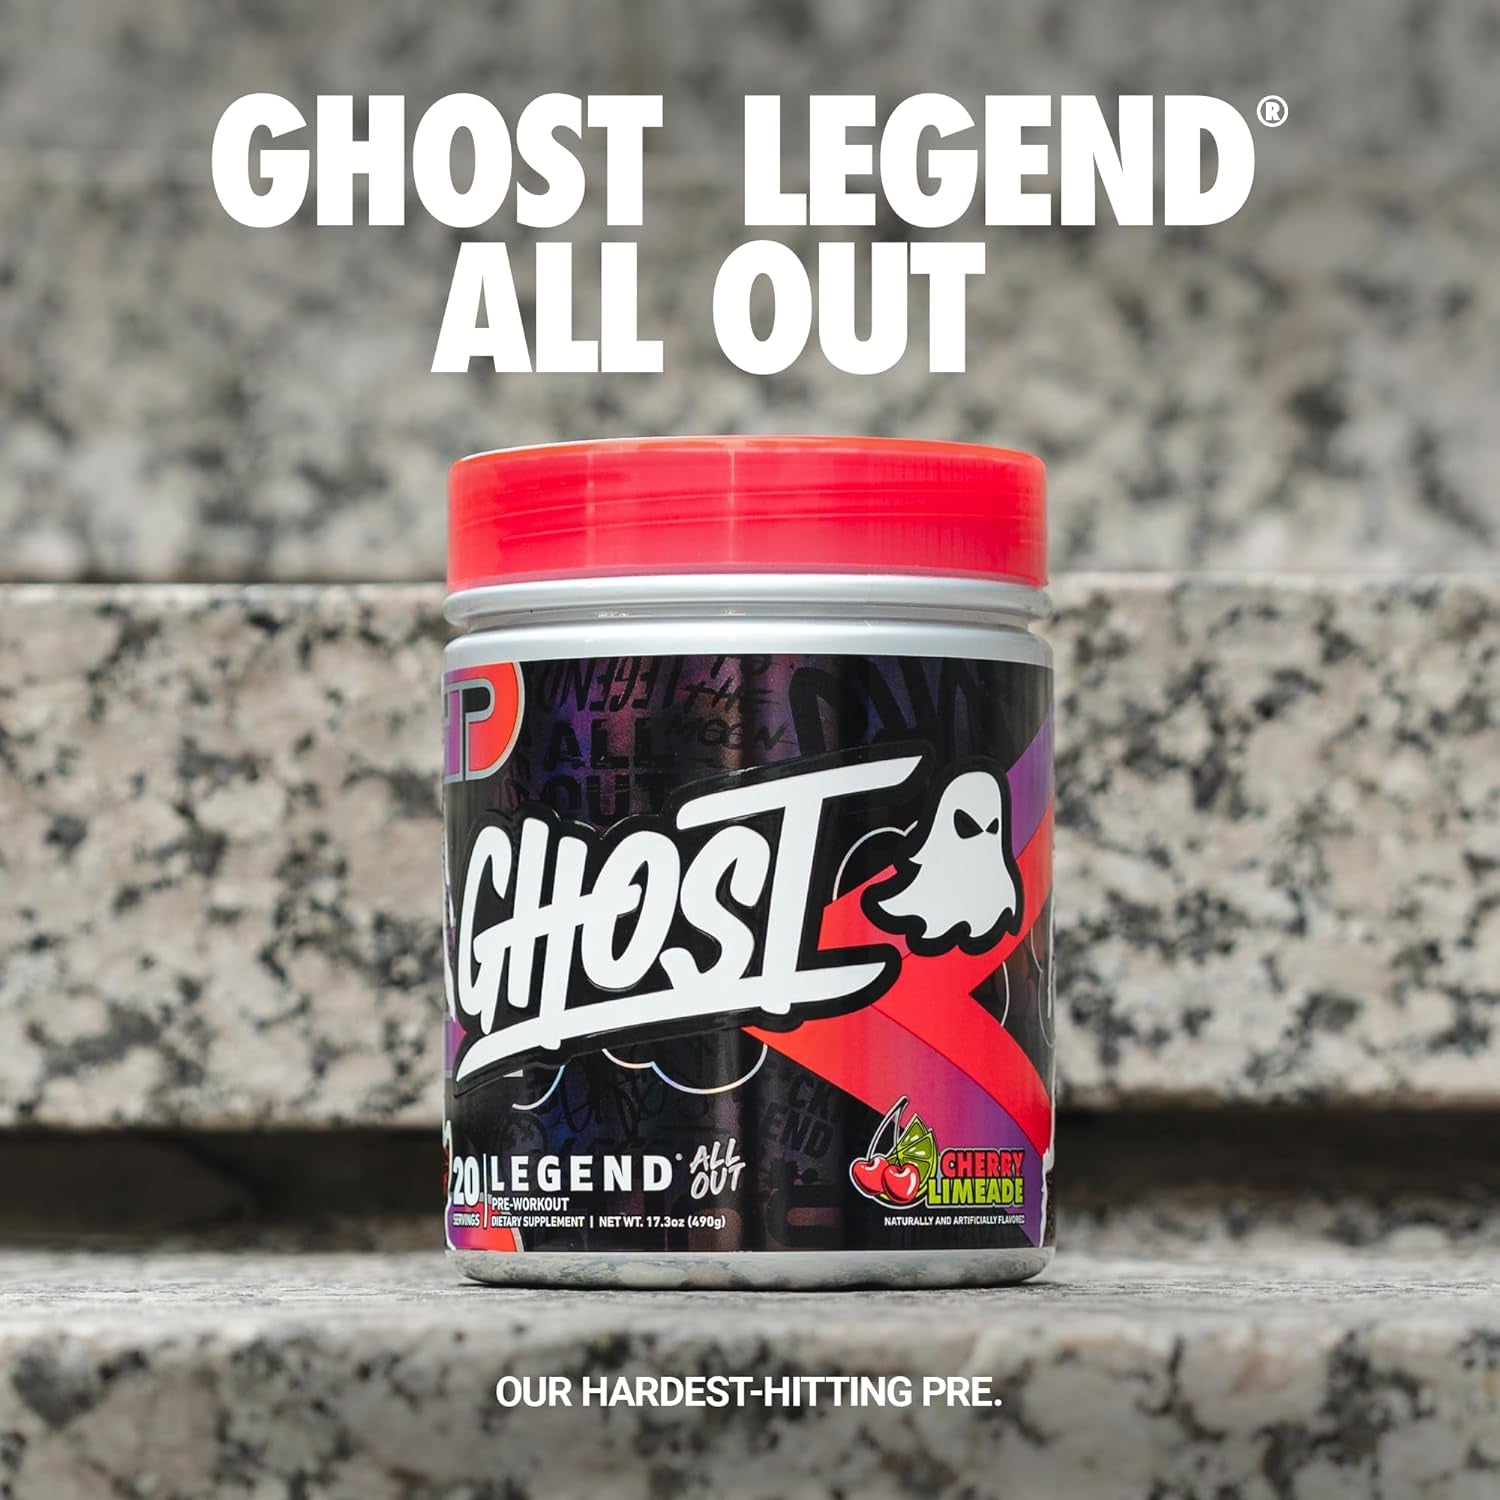 Legend All Out Pre Workout - Cherry Limeade